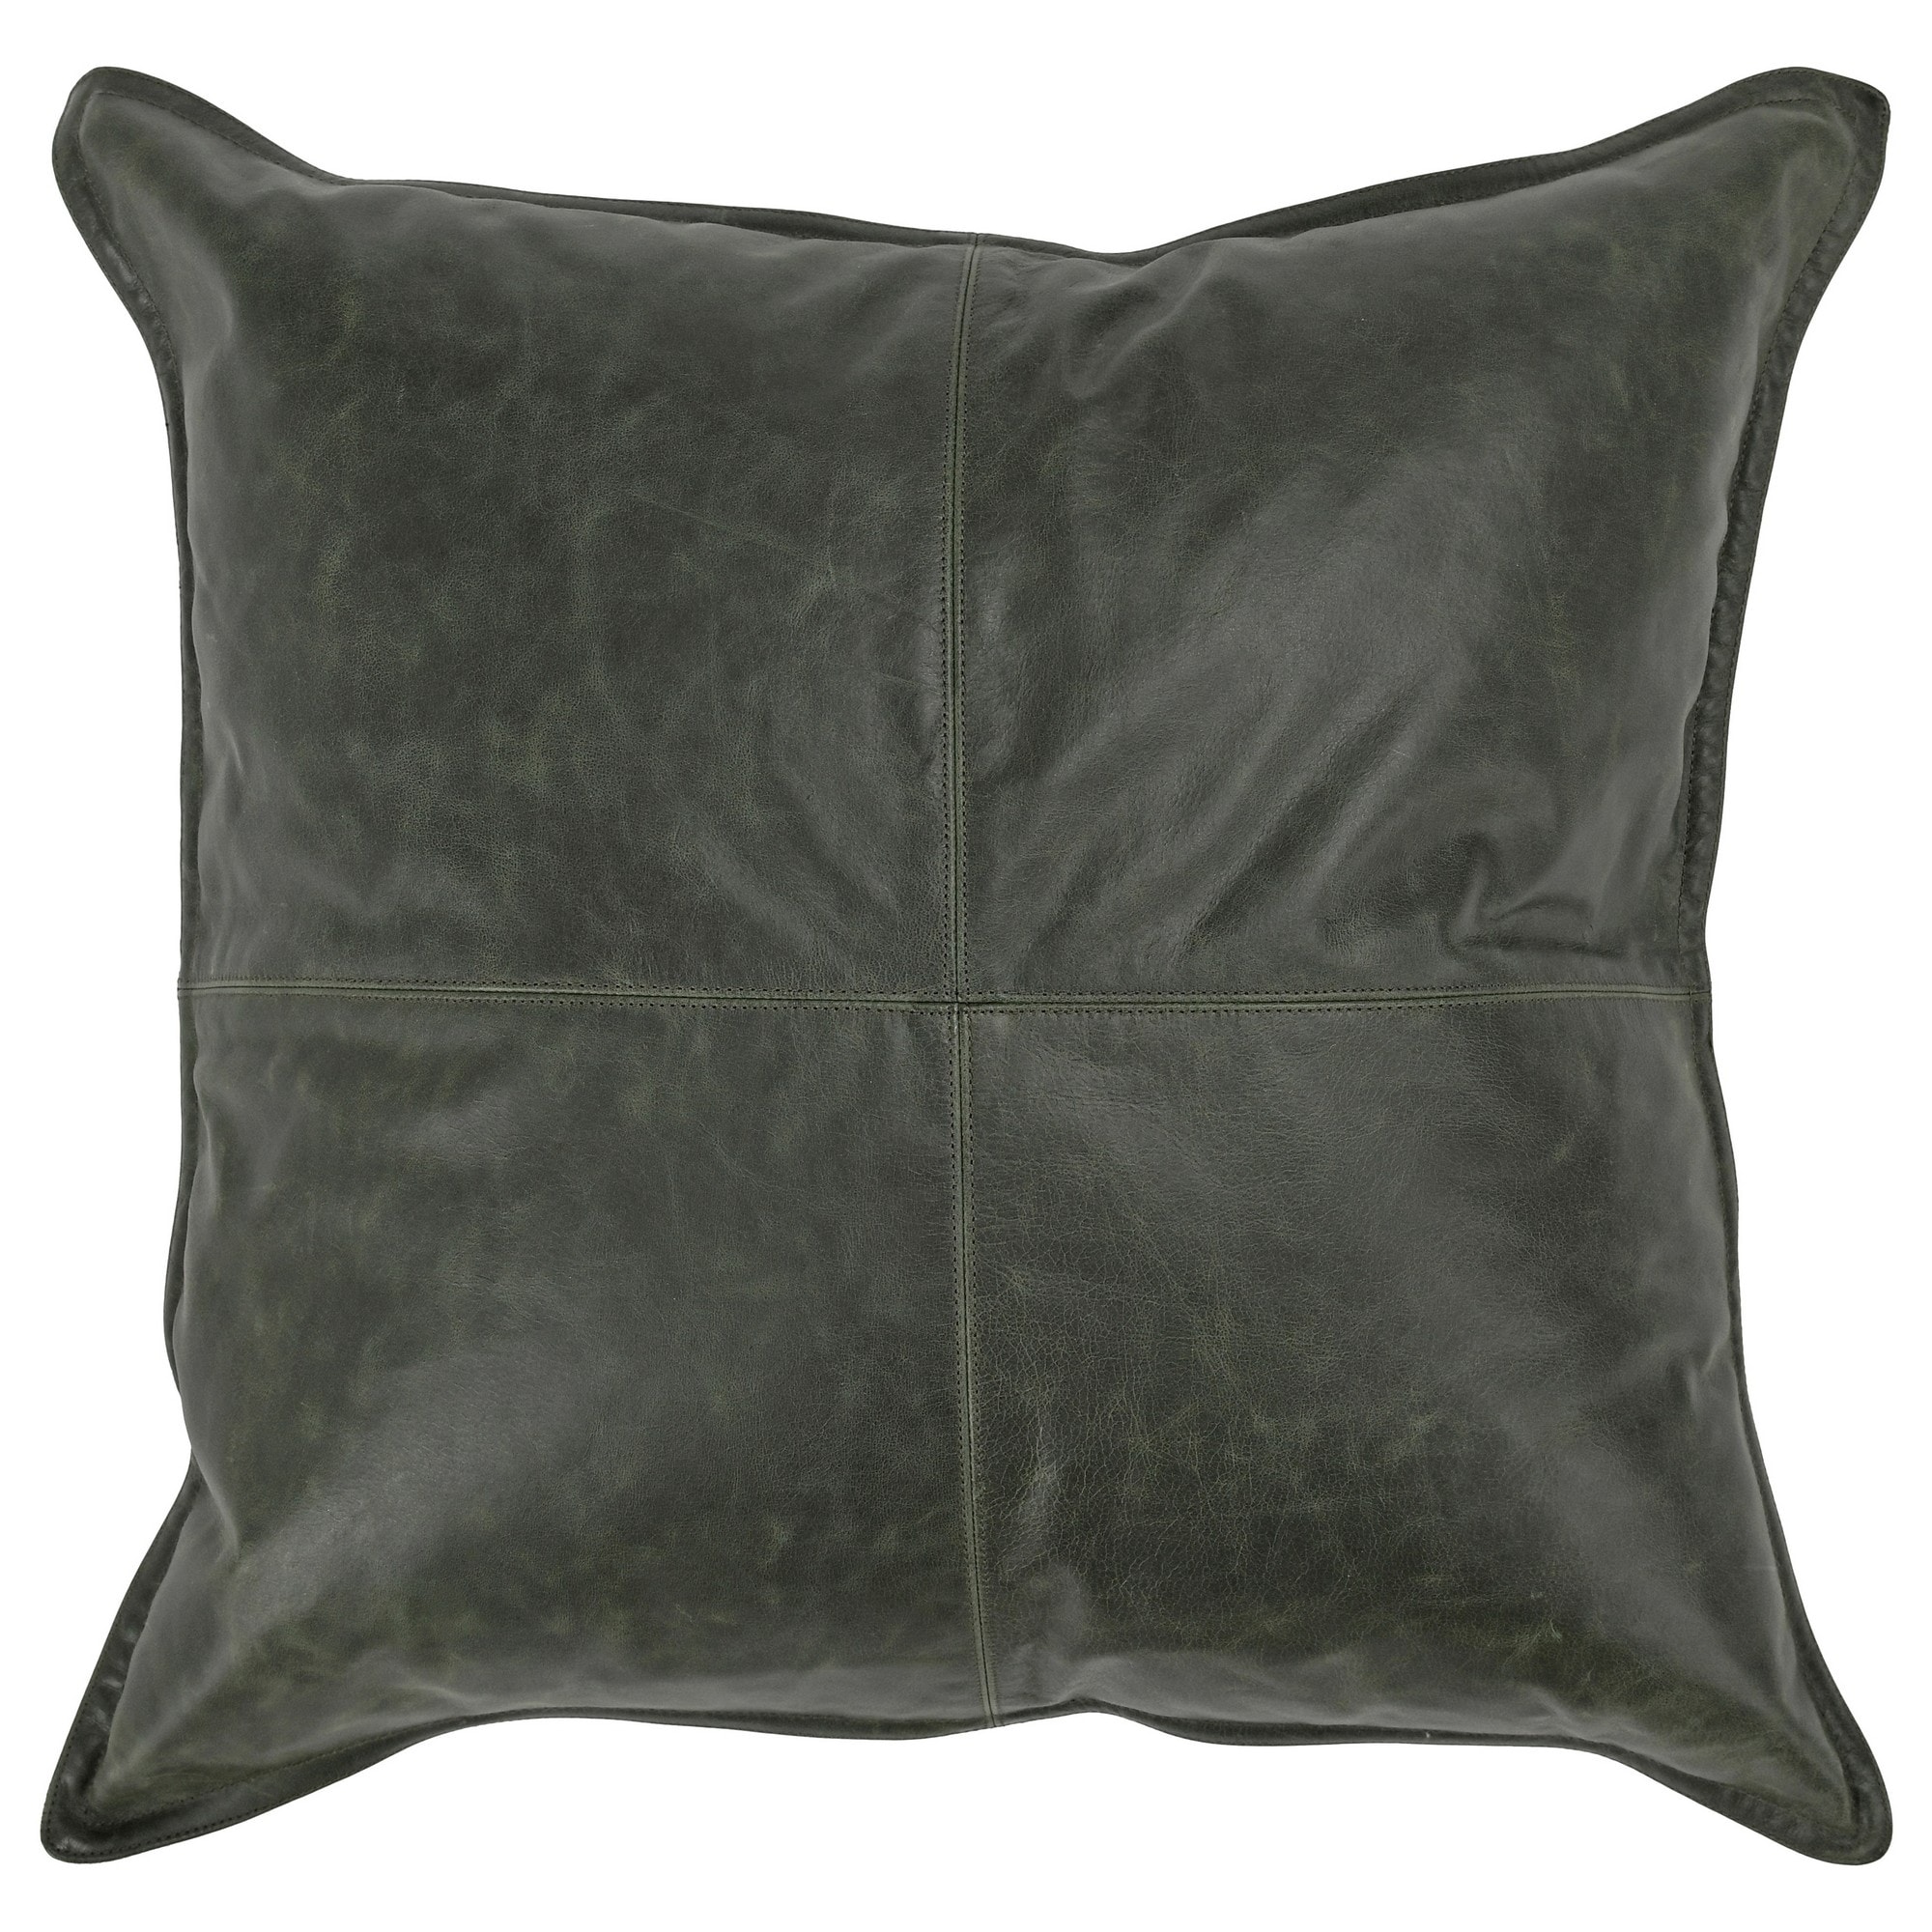 https://ak1.ostkcdn.com/images/products/is/images/direct/185ab043b0791100c902dc4a3c605201145c2407/Norm-22-Inch-Square-Accent-Throw-Pillow%2C-Pieced-Design-Forest-Green-Leather.jpg